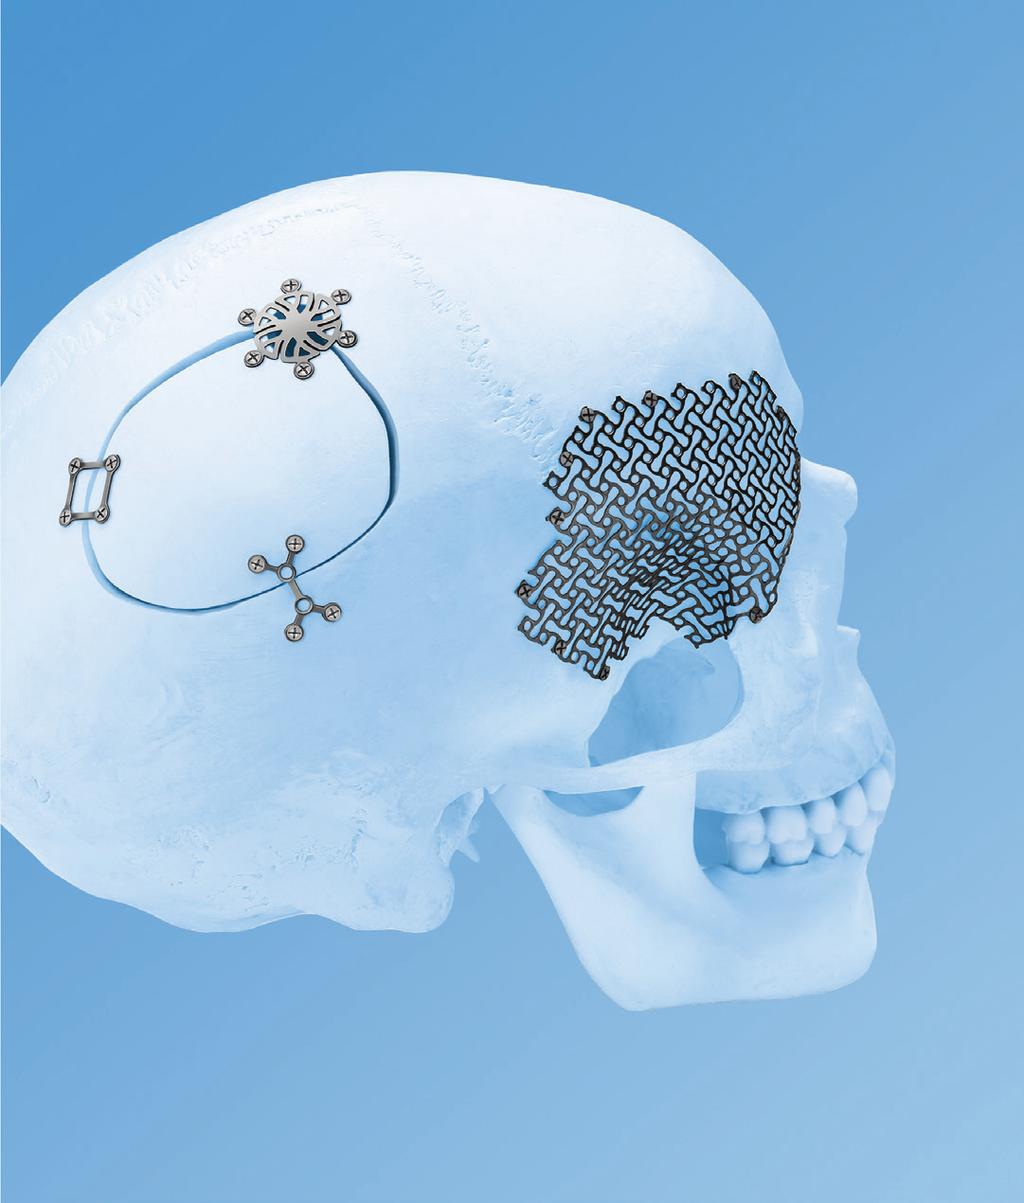 LOW PROFILE NEURO PLATING SYSTEM Introduction The aim of surgical fracture treatment is to reconstruct the bony anatomy and restore its function.